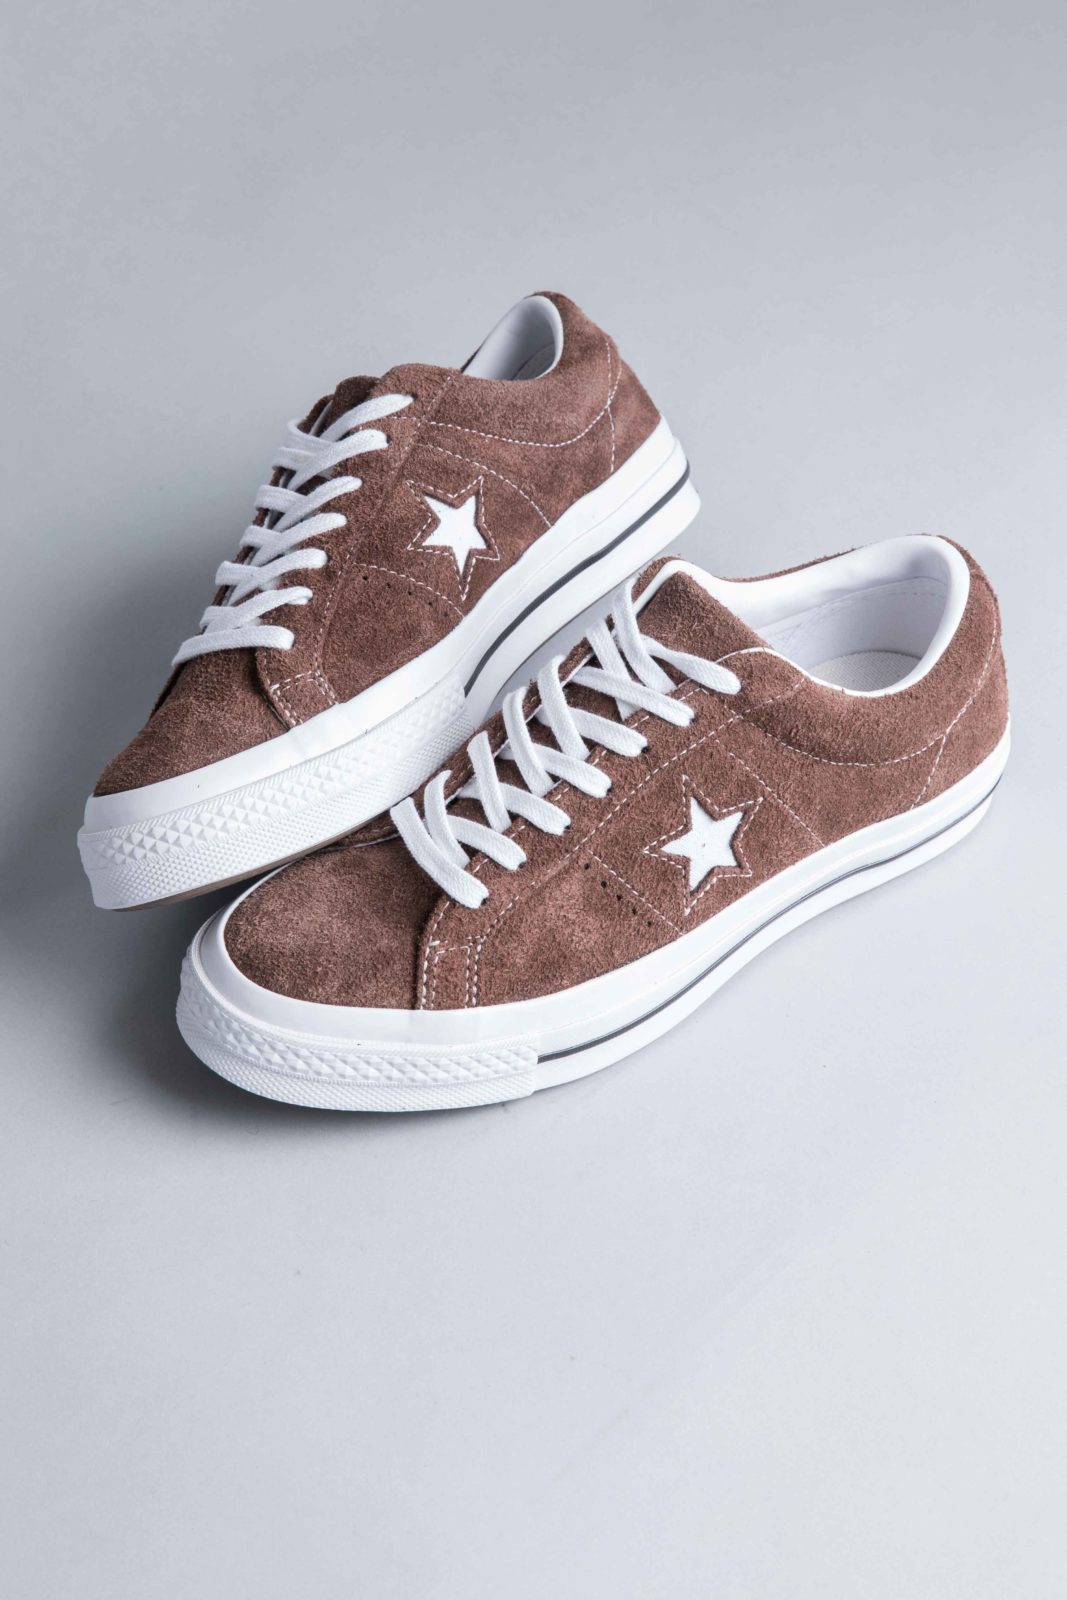 converse one star ox brown